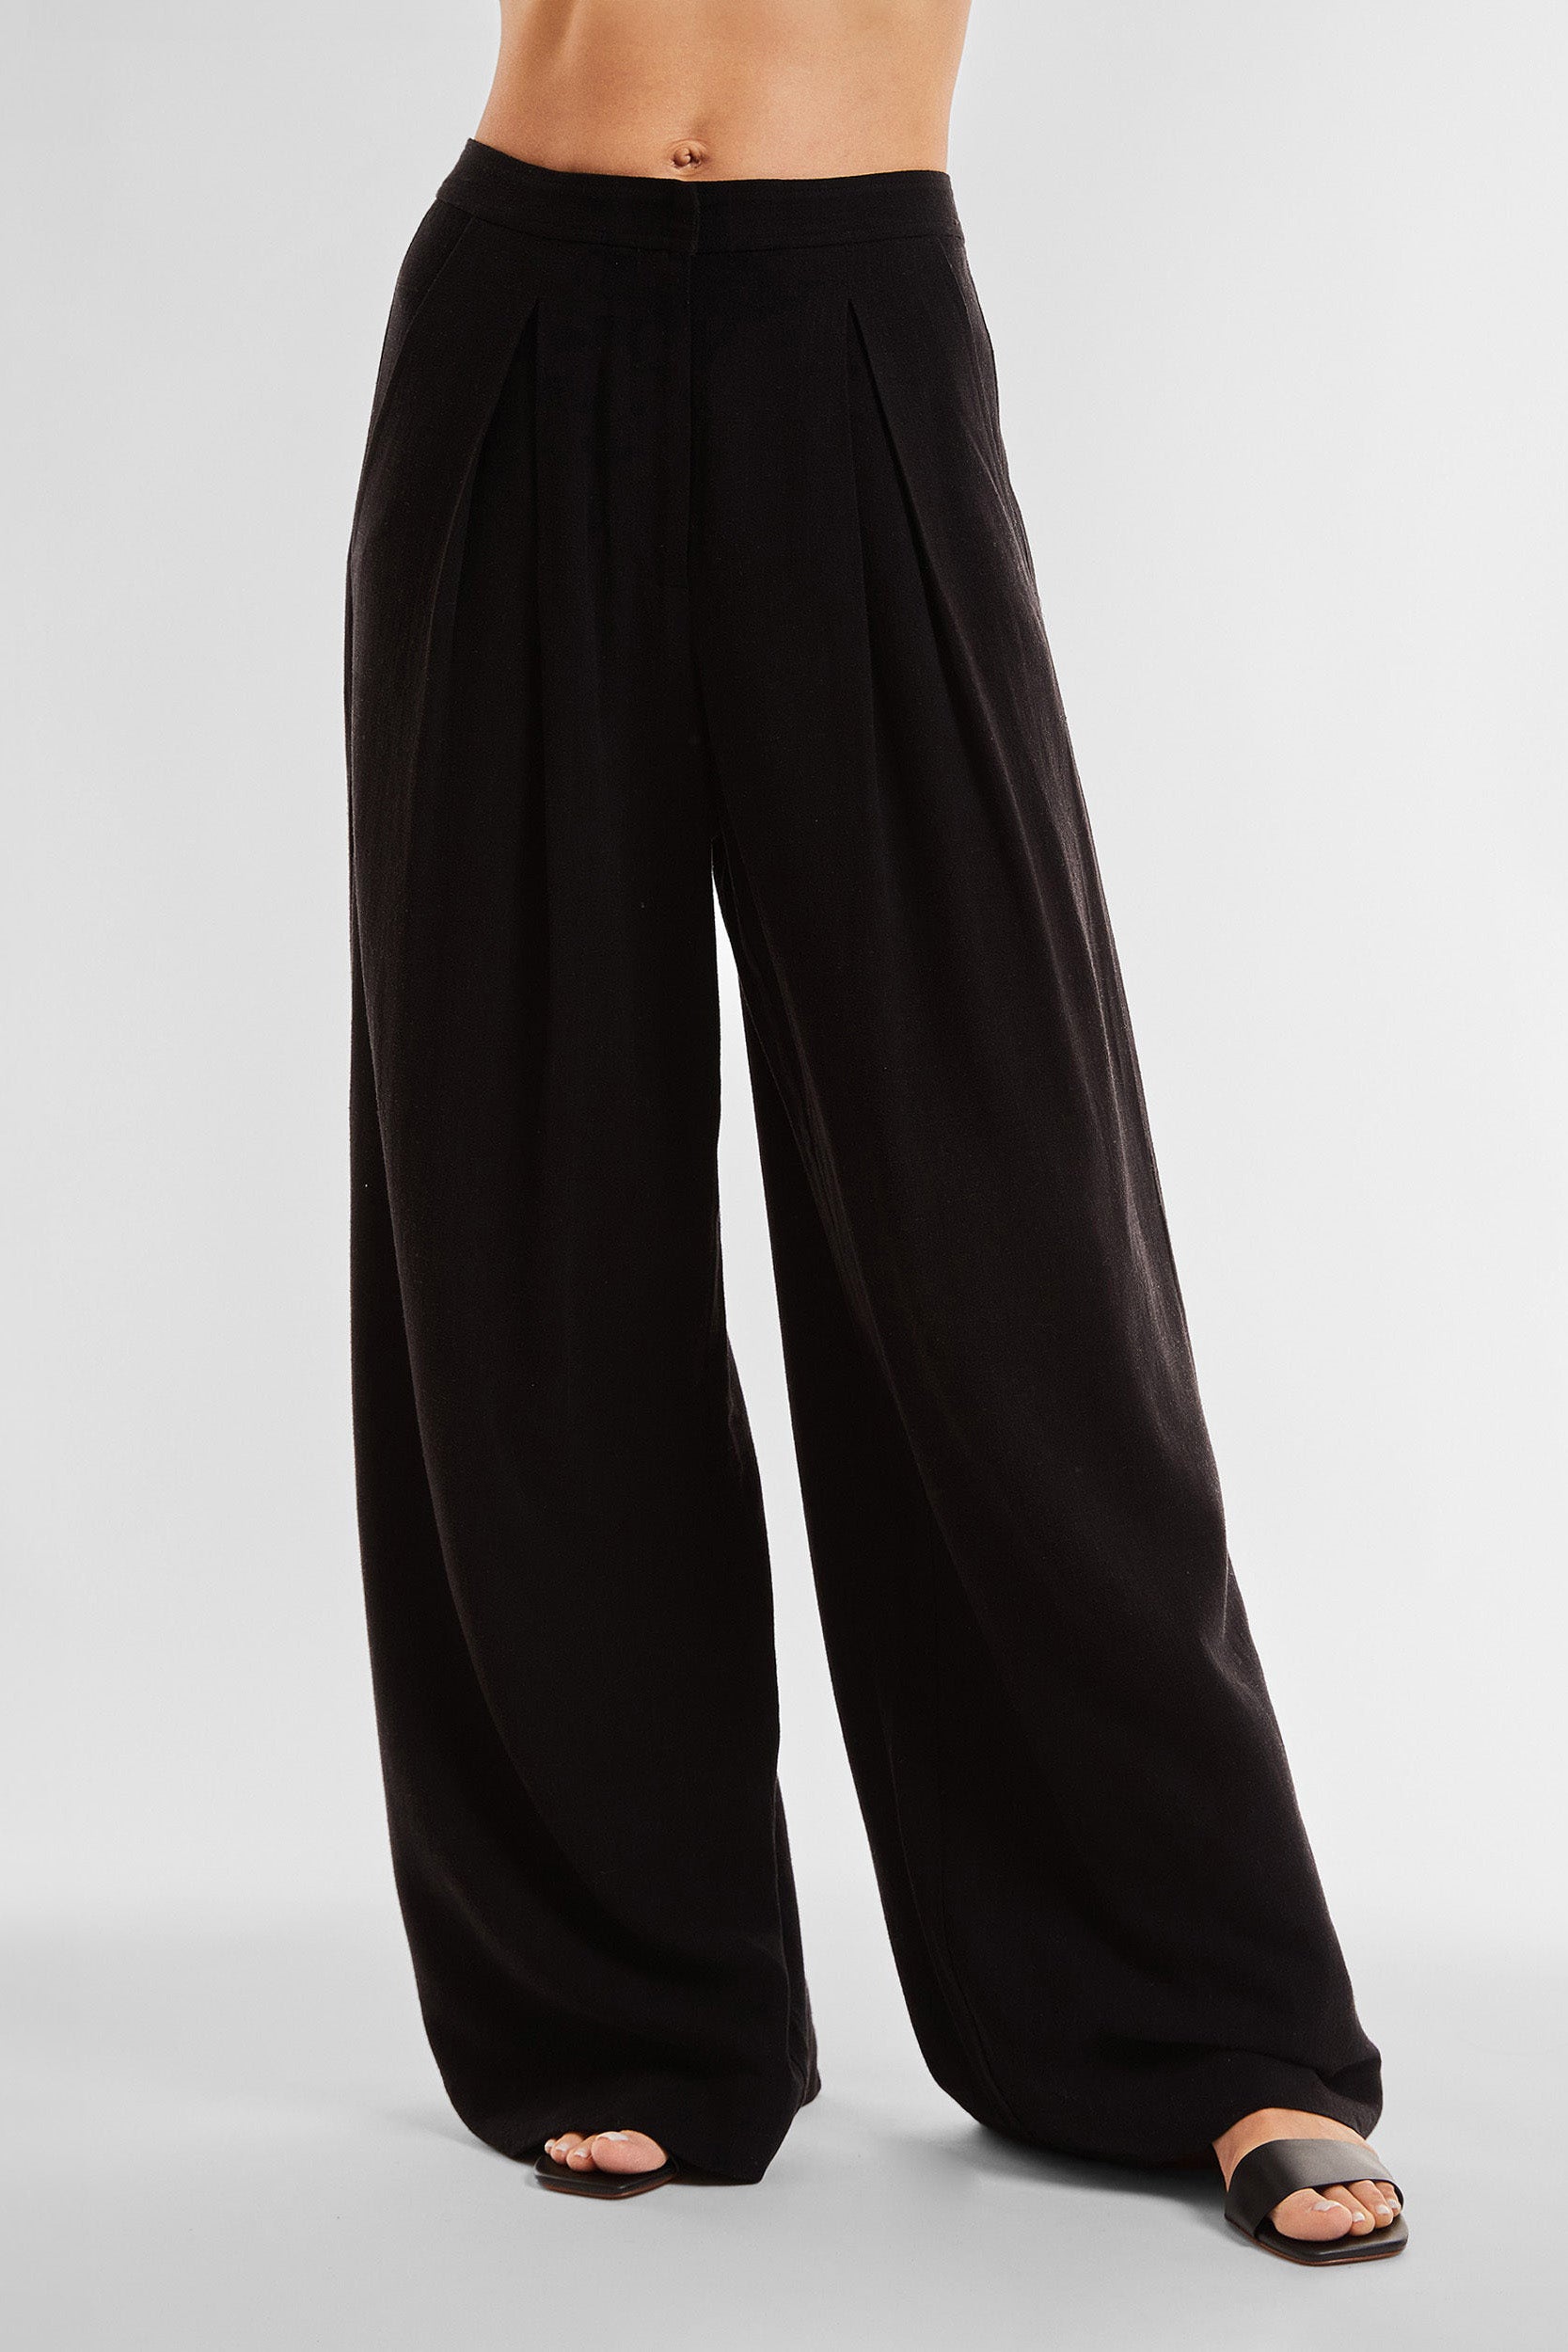 A person is modeling the Seychelles Relaxed Linen Pant - Black, which features wide legs and front pleats. These high-waisted, relaxed linen pants offer a breathable fit and are paired with black open-toe sandals. The photo is taken against a plain white background, showcasing only the model's lower torso and legs.